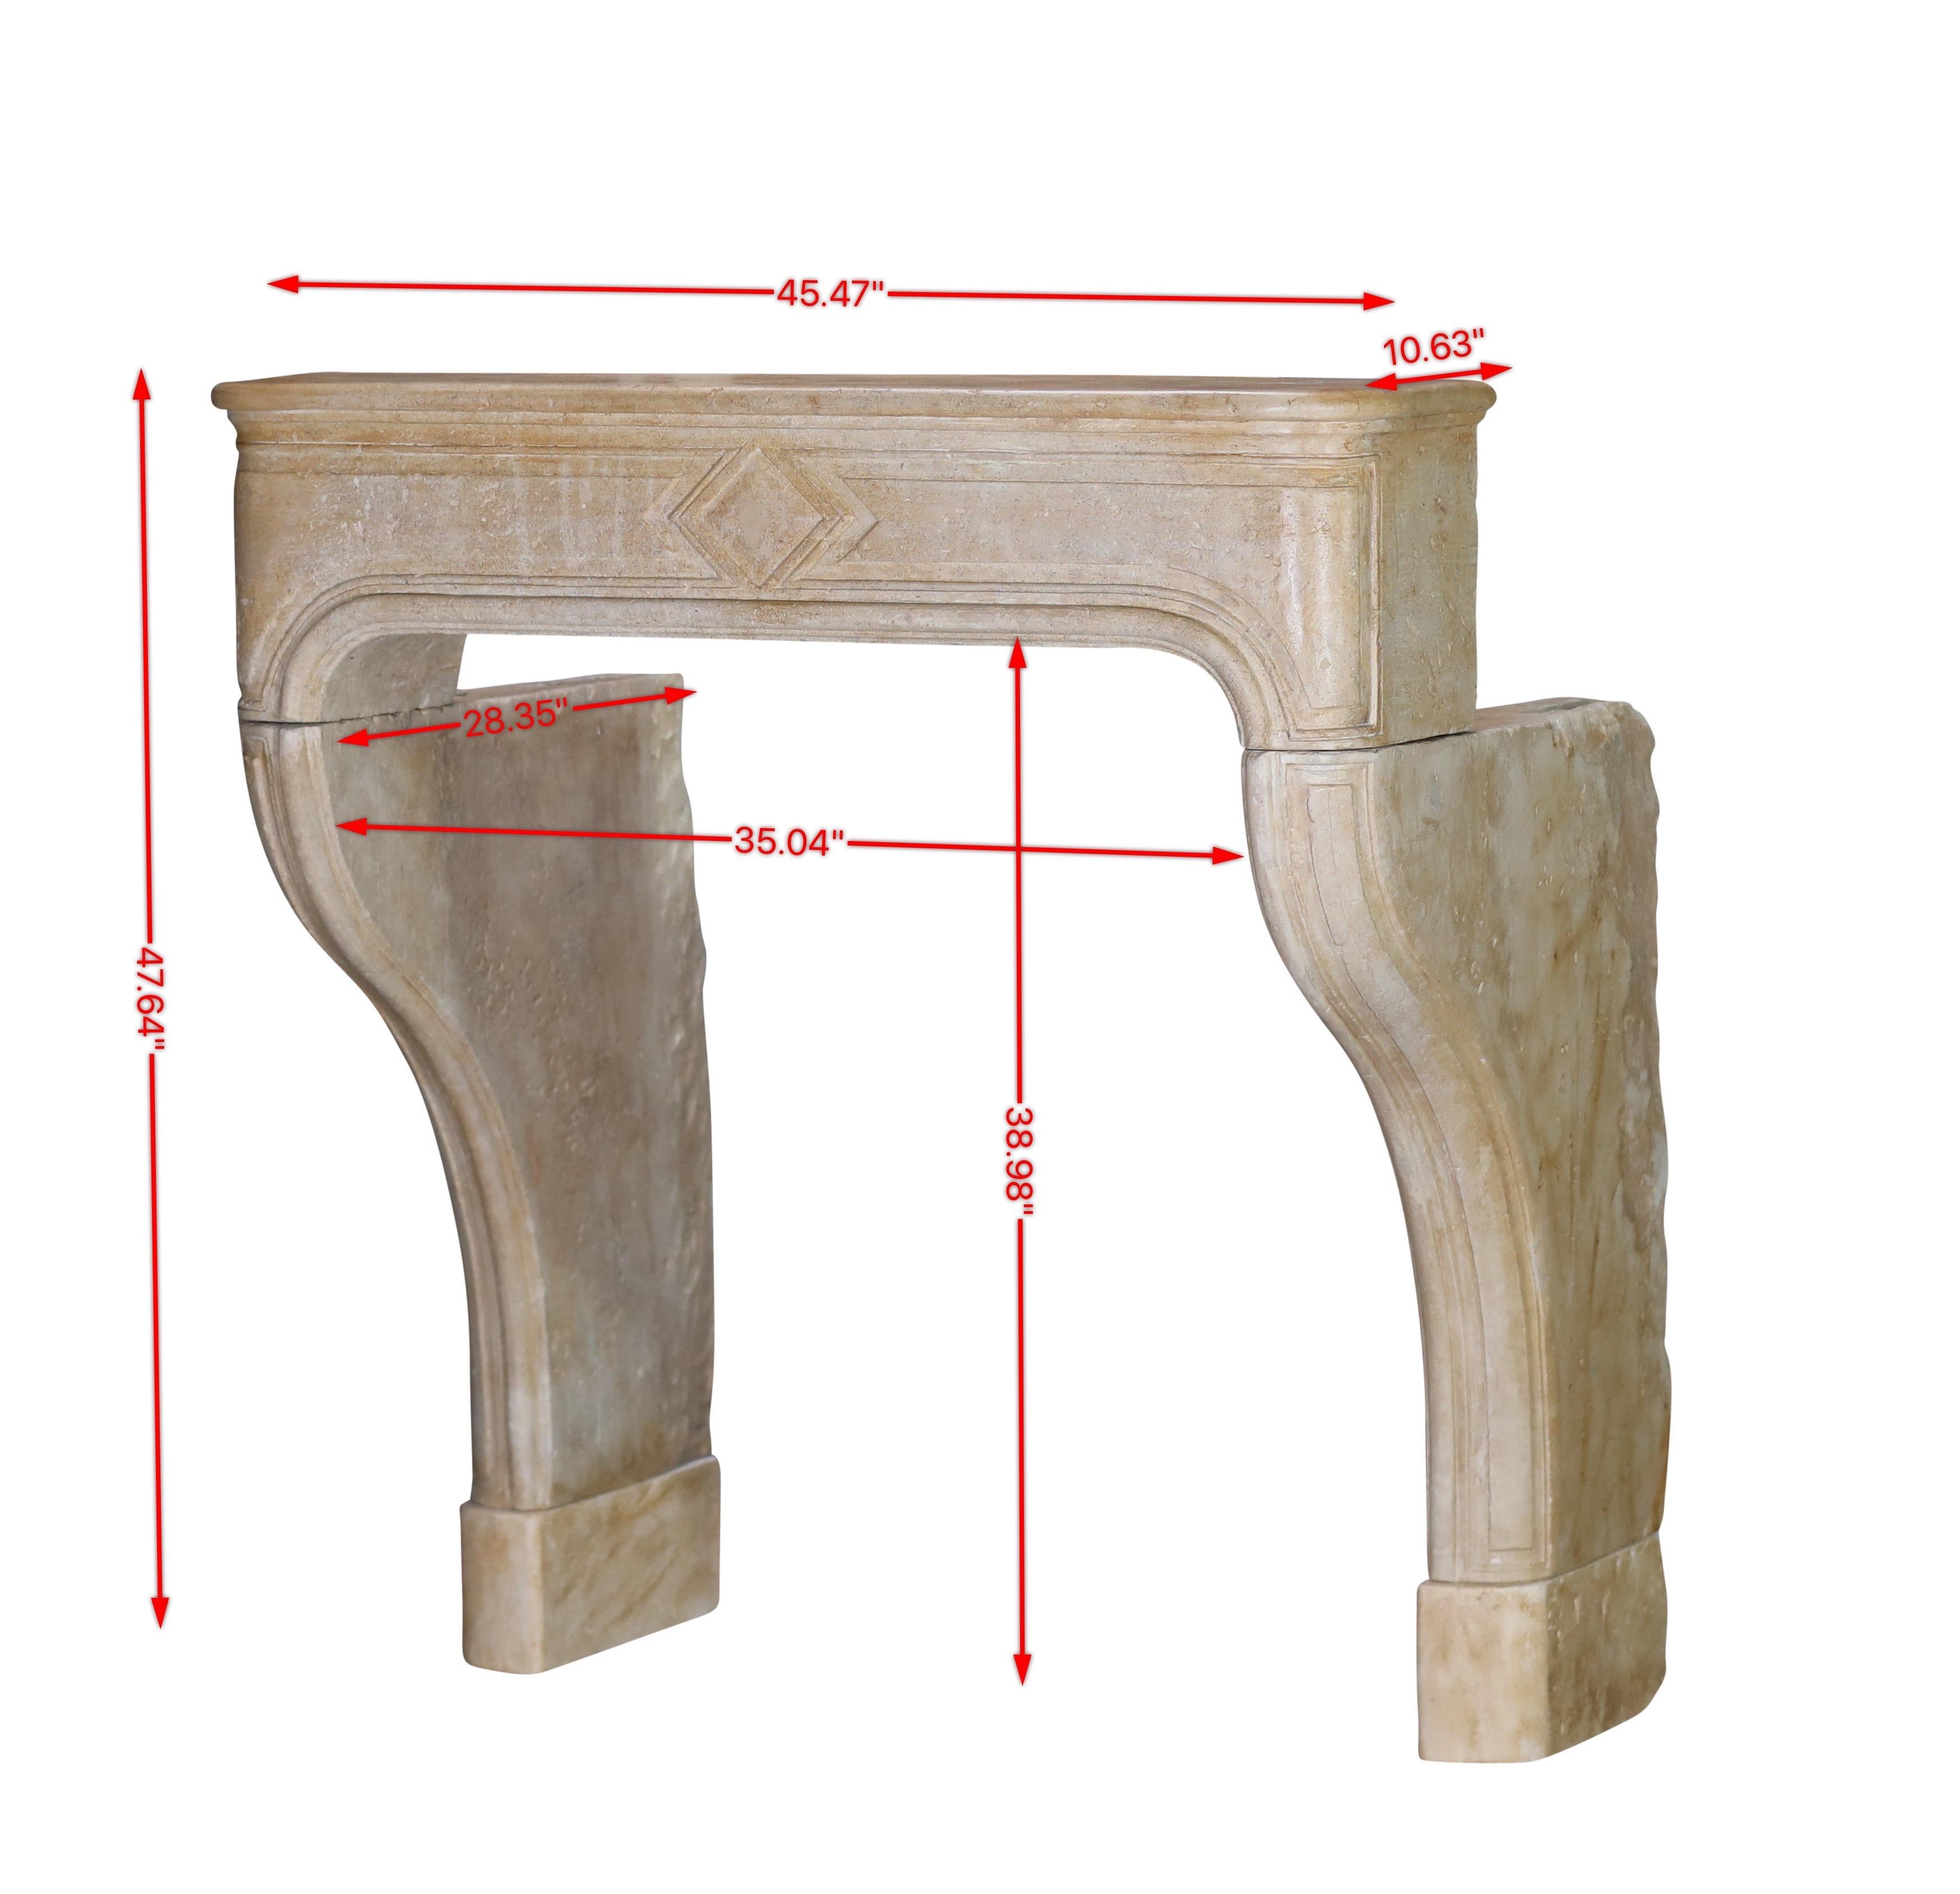 Extra small Louis XIV period fireplace surround in limestone. This reclaimed fireplace mantle with elegant jambs is unique its kind. It has some small artempo restorations and is ready to be installed.
Measurements:
115,5 cm Exterior Width 45,47